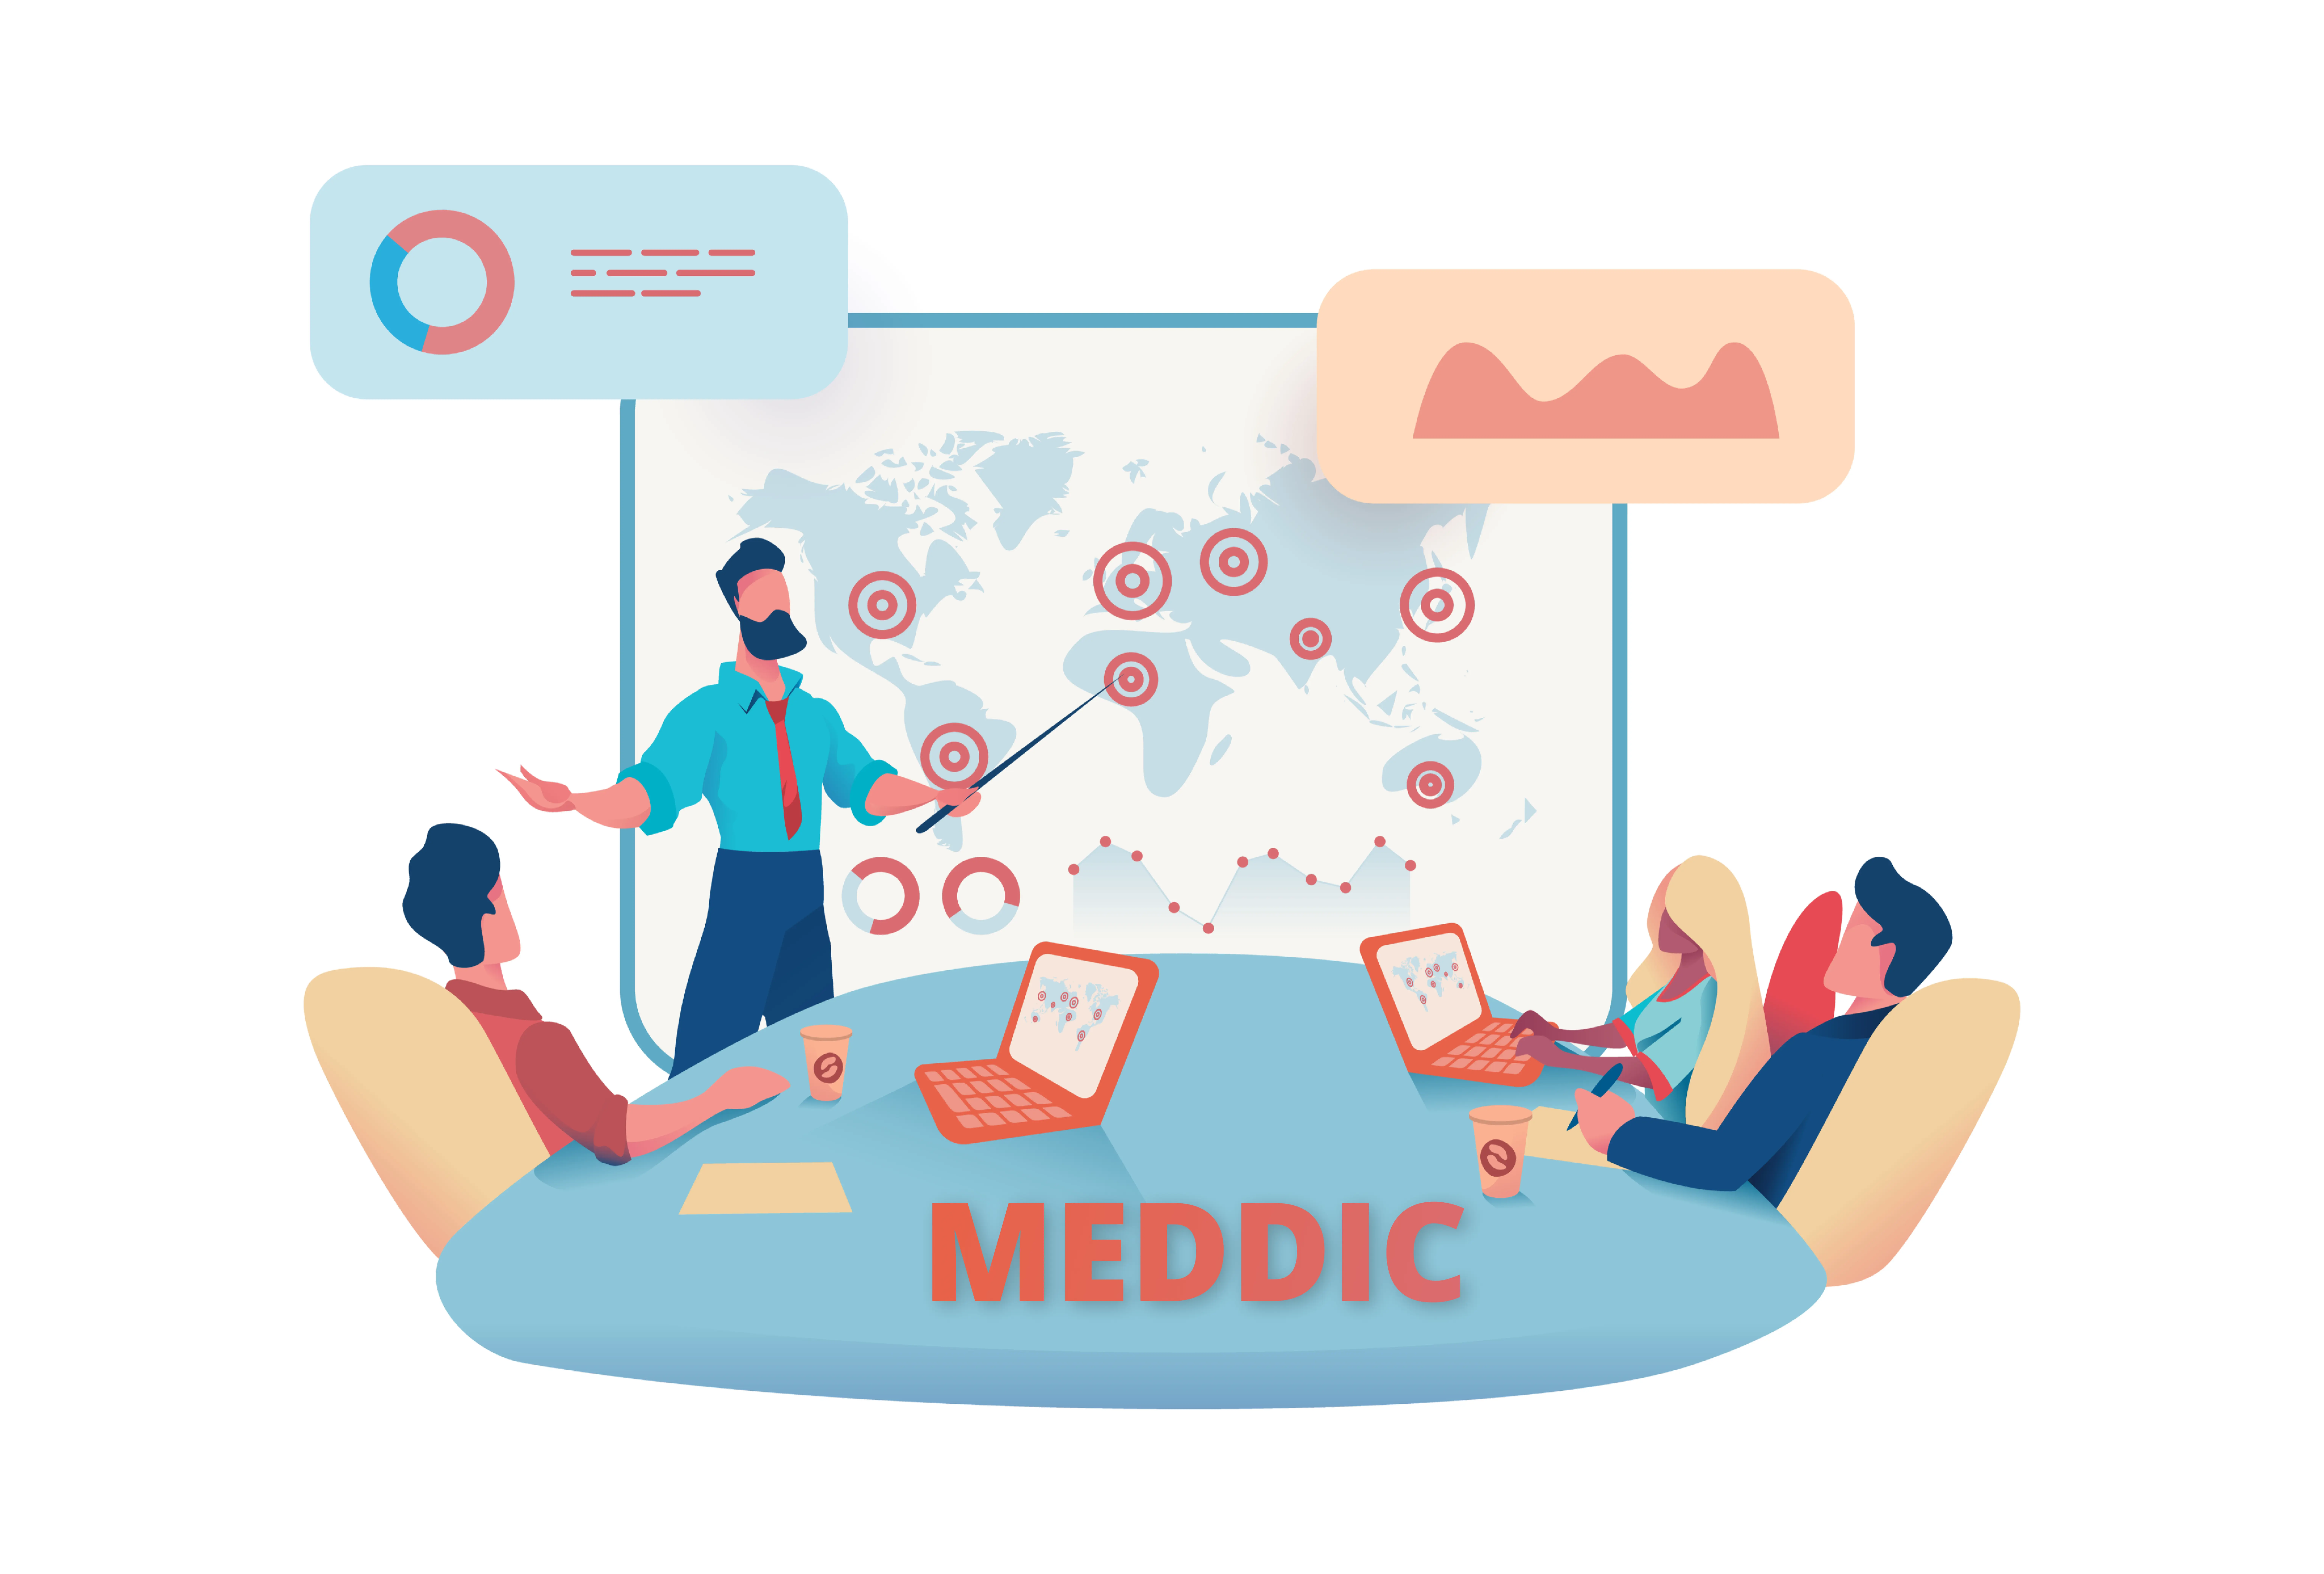 Discussion guide on using MEDDIC to qualify leads. What questions to ask your clients.